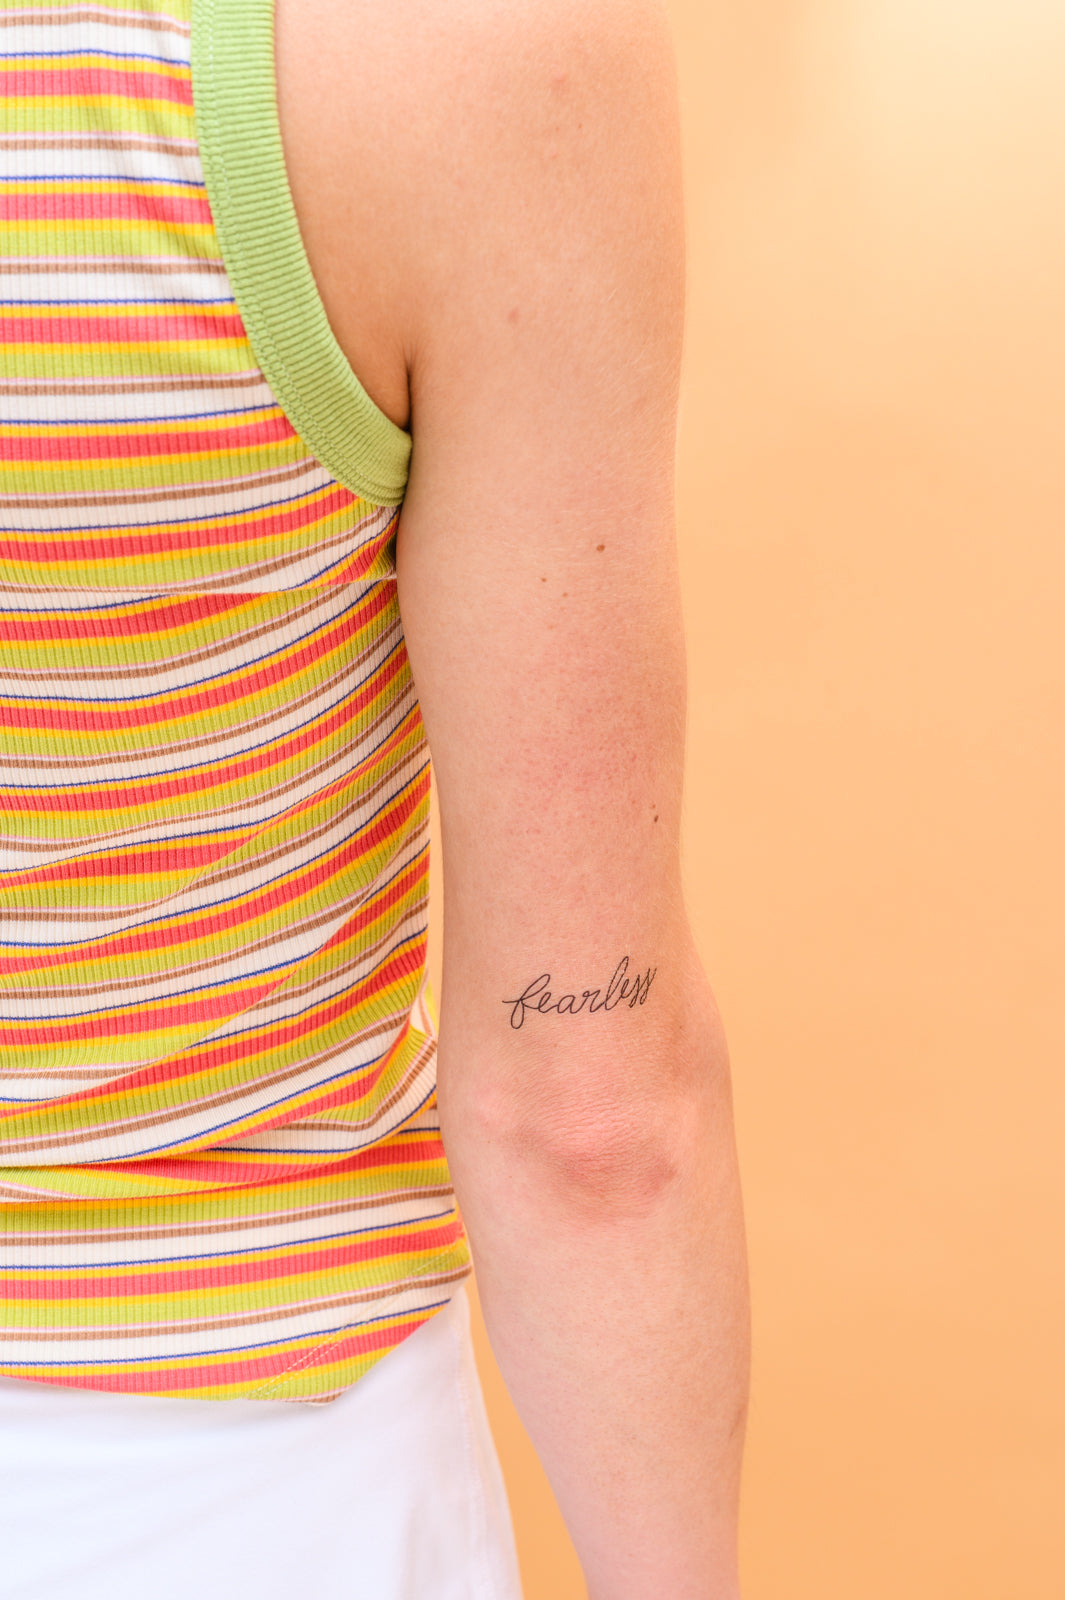 Words For A Season Temporary Tattoo - WEBSITE EXCLUSIVE